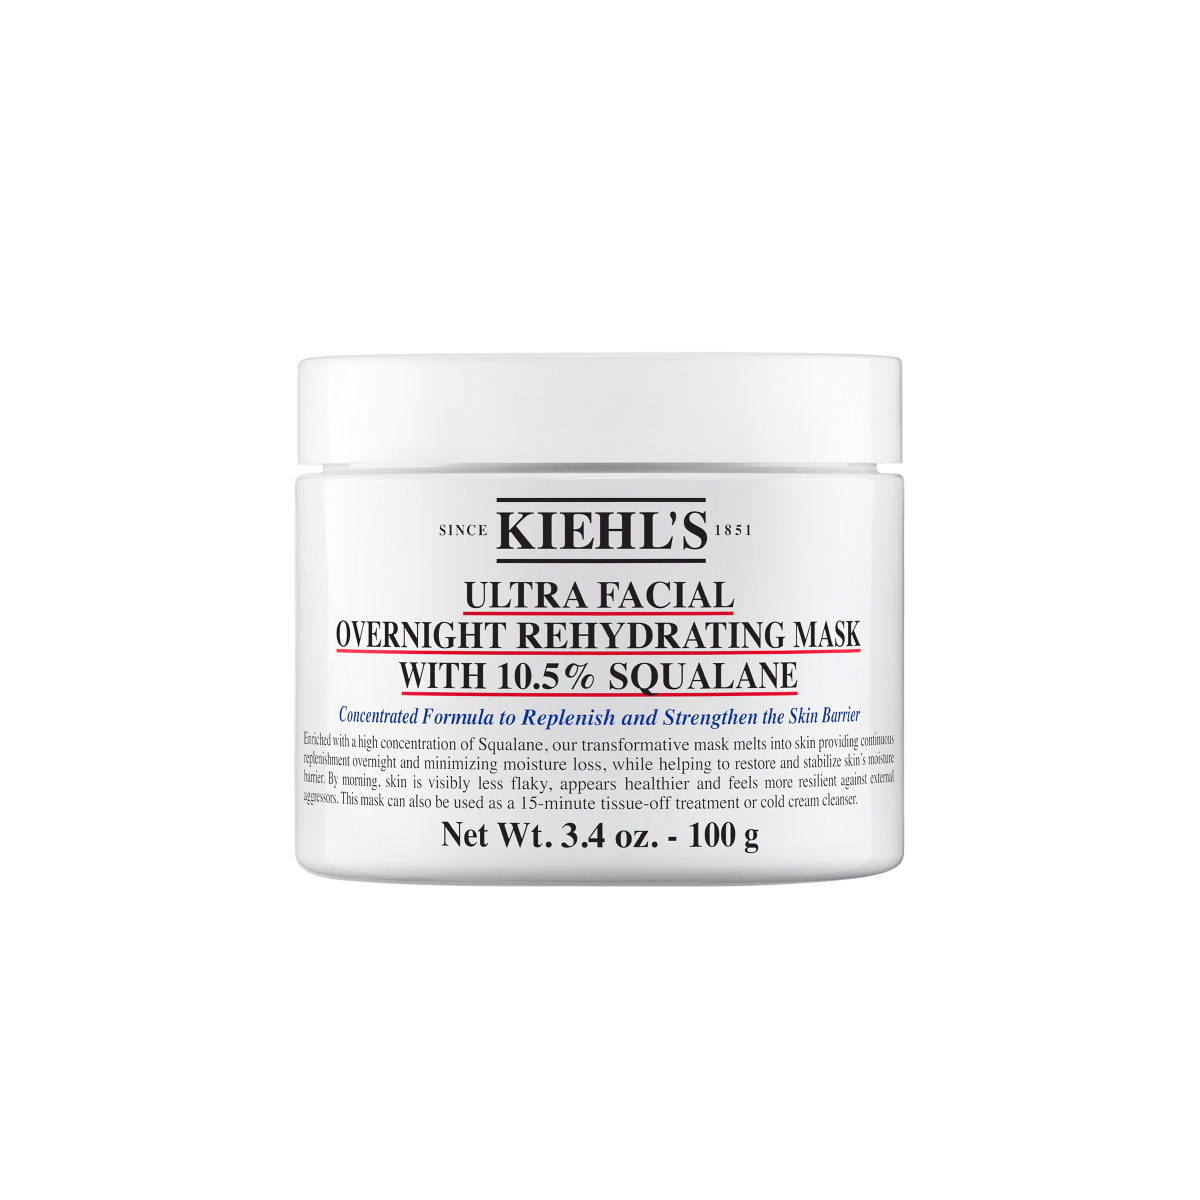 Kiehl's Ultra Facial Overnight Rehydrating Mask with 10.5% Squalane